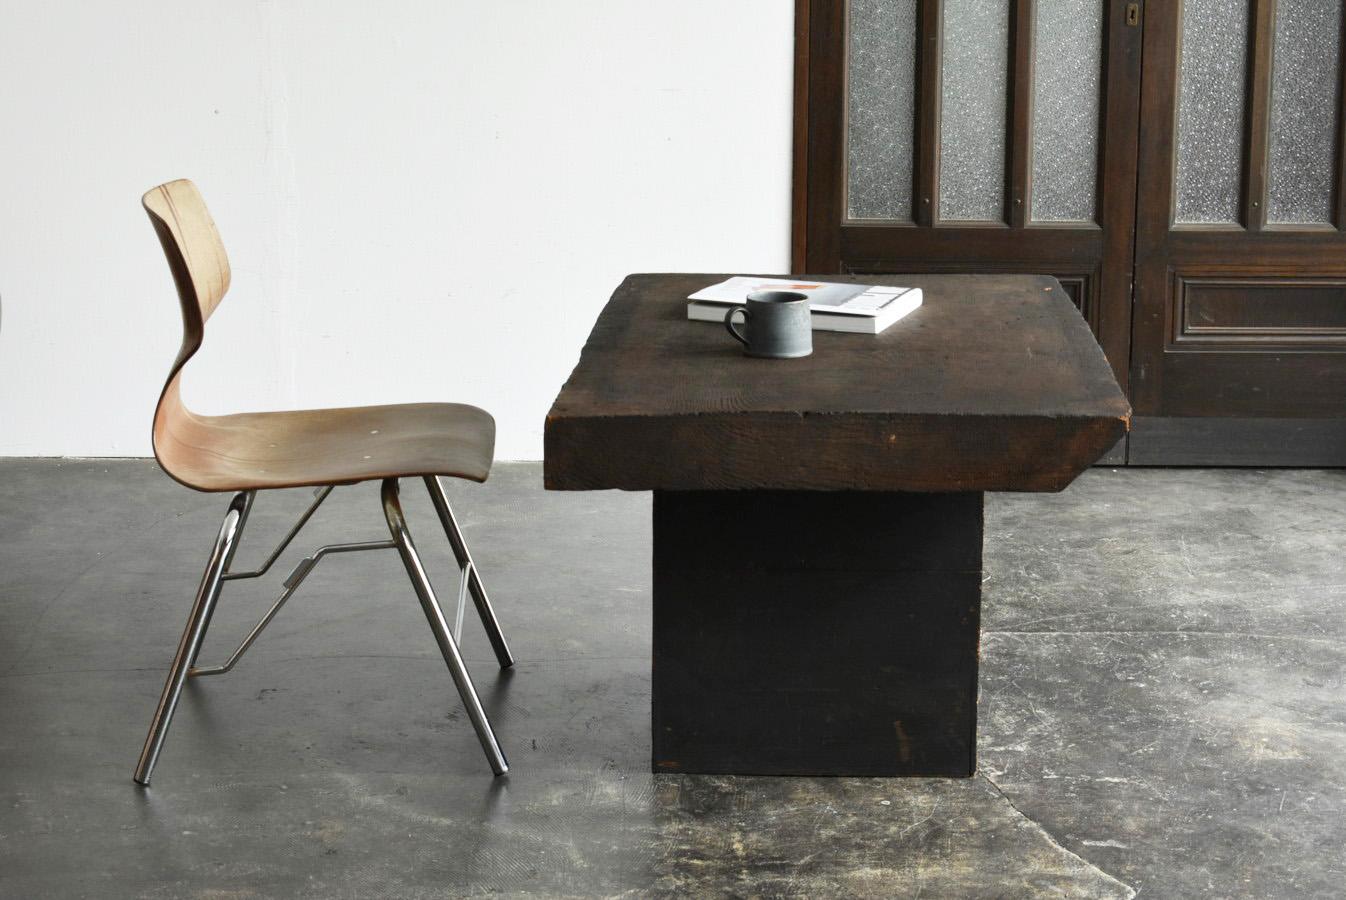 This is an item from Japan's Meiji to Taisho eras (1868-1900).
It was originally used by a farmer, but it has been left unused for a long time, so it is black like this.
The material is pine or cedar wood.
And the table base is an old black wooden